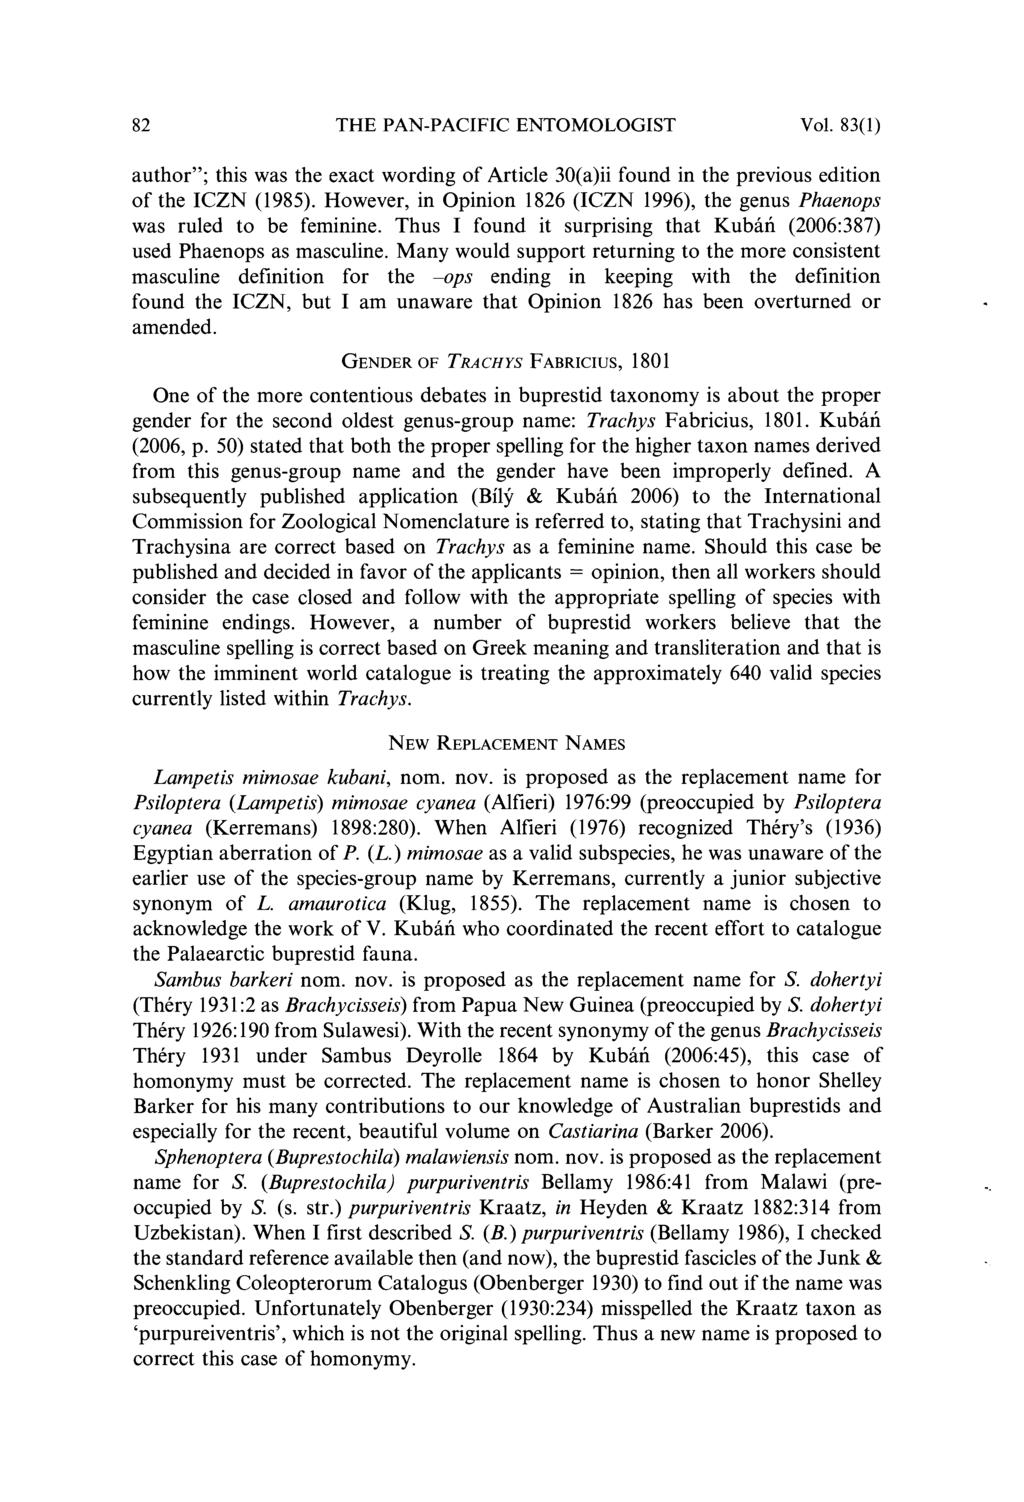 82 THE PAN-PACIFIC ENTOMOLOGIST Vol. 83(1) author"; this was the exact wording of Article 30(a)ii found in the previous edition of the ICZN (1985).